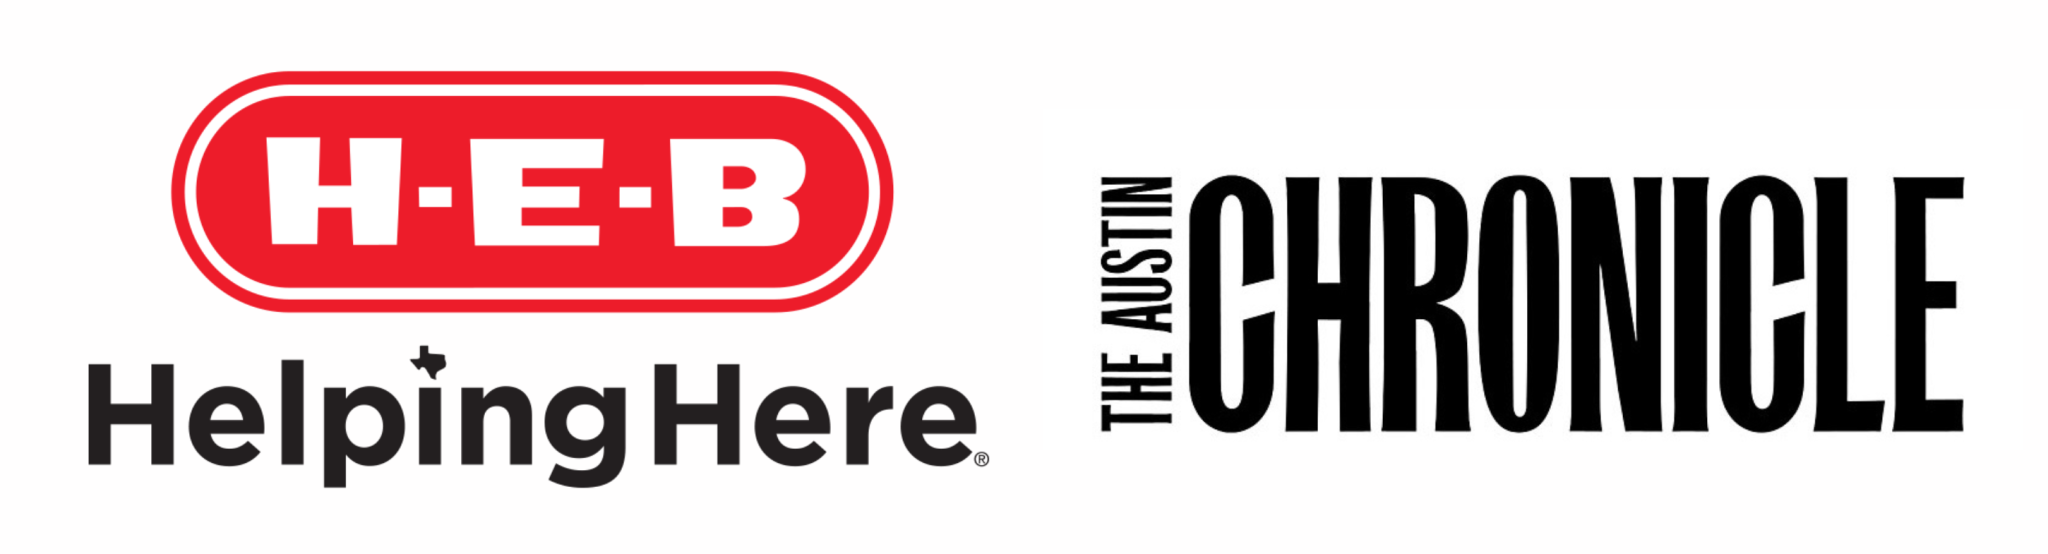 two logos, H-E-B (helping here) and The Austin Chronicle